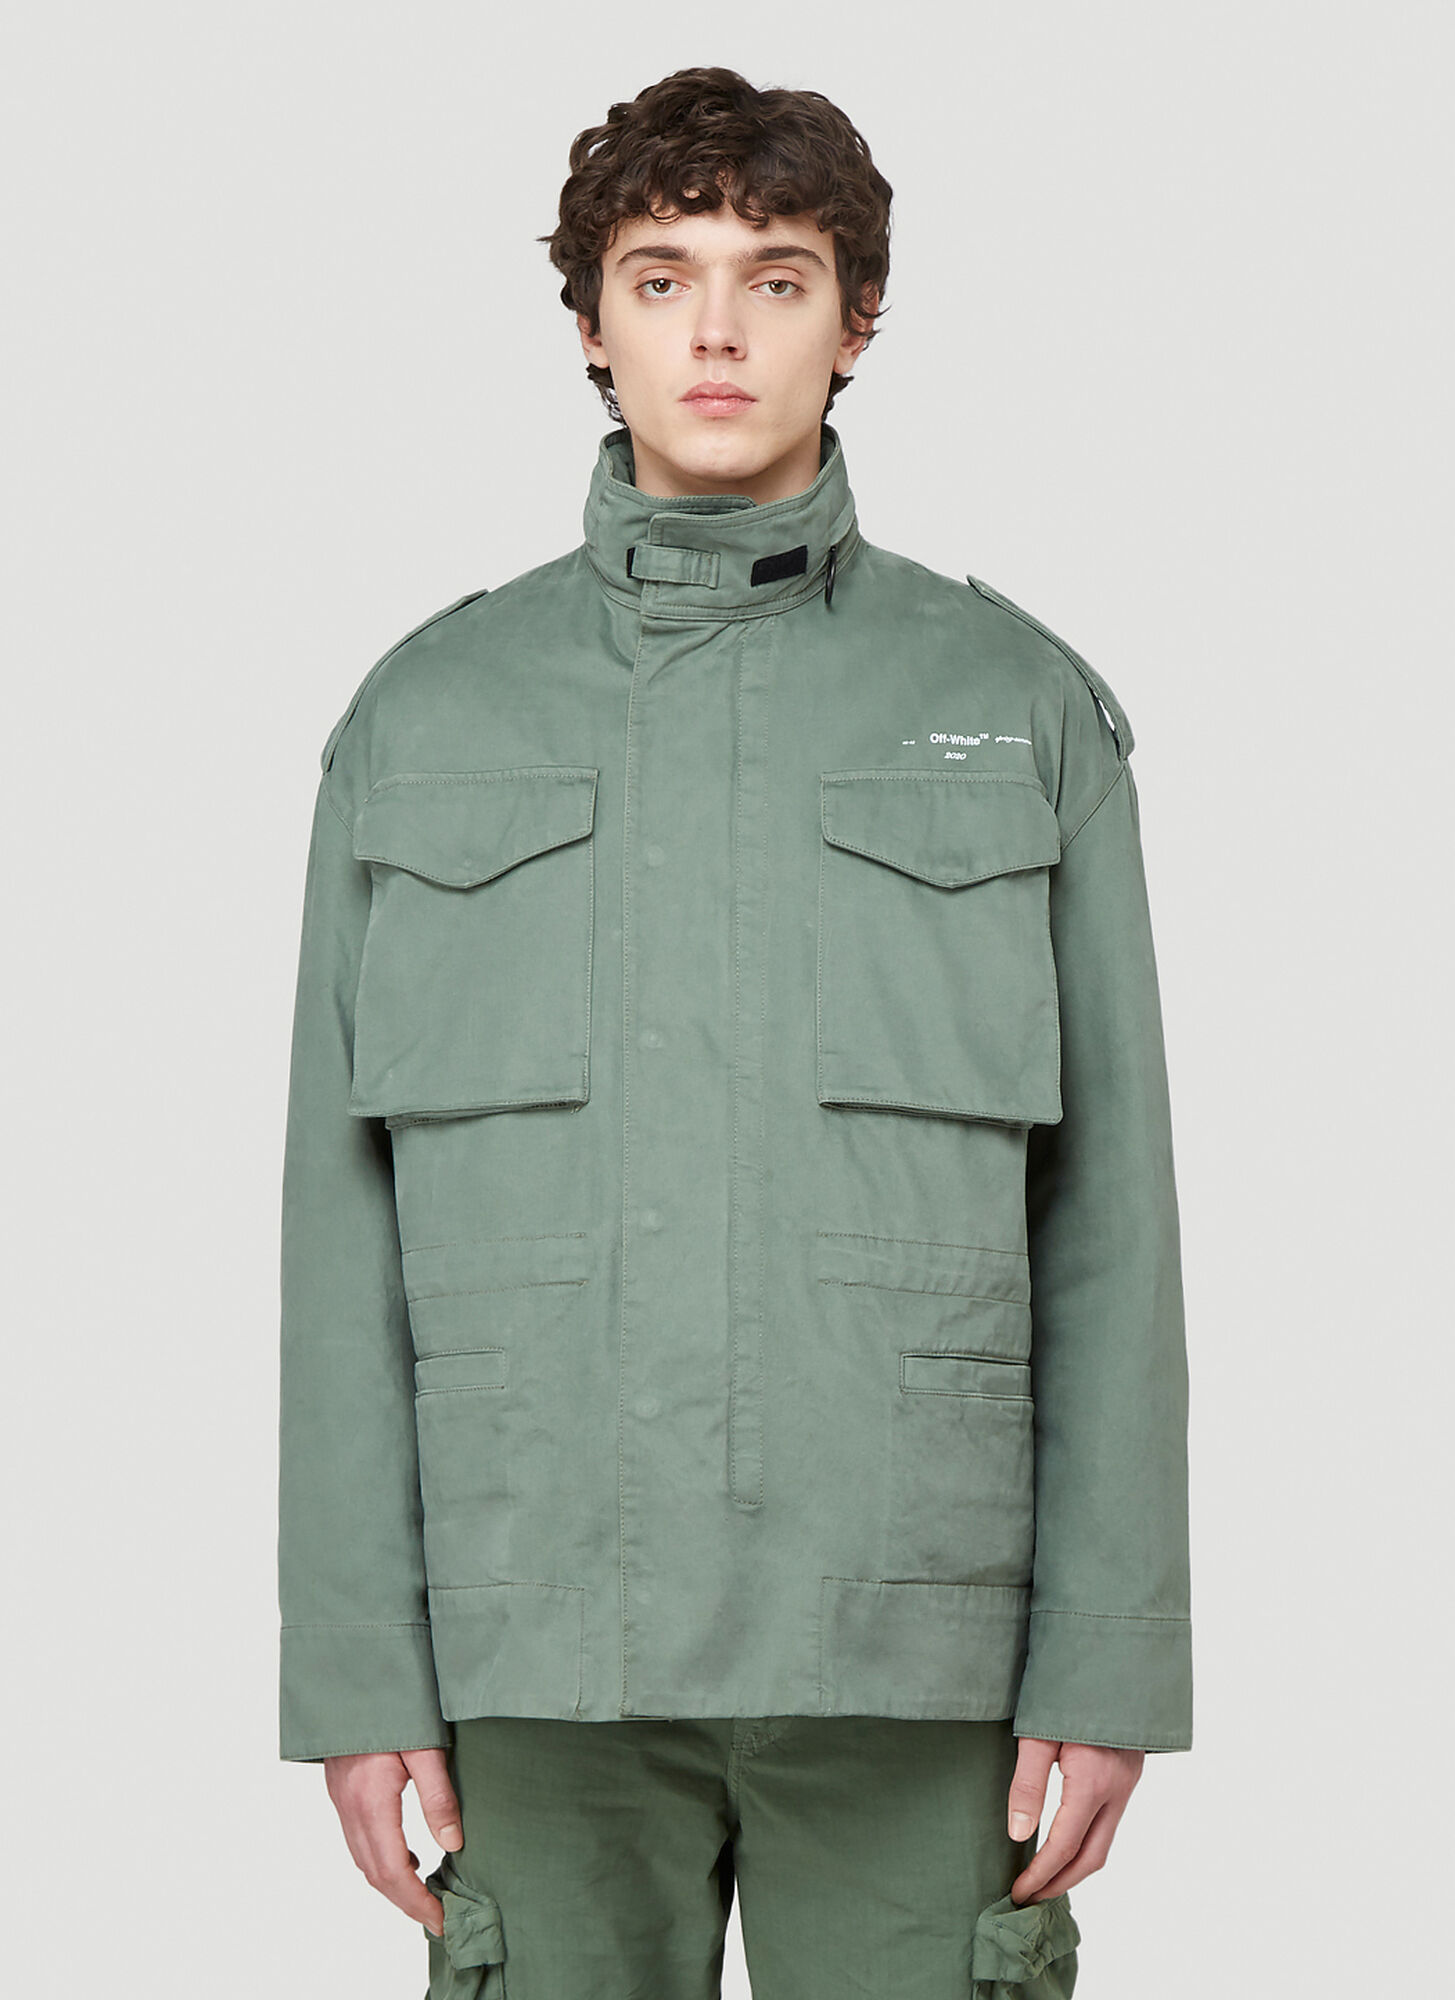 Off-White Padded Military Jacket in Green size L | The Fashionisto